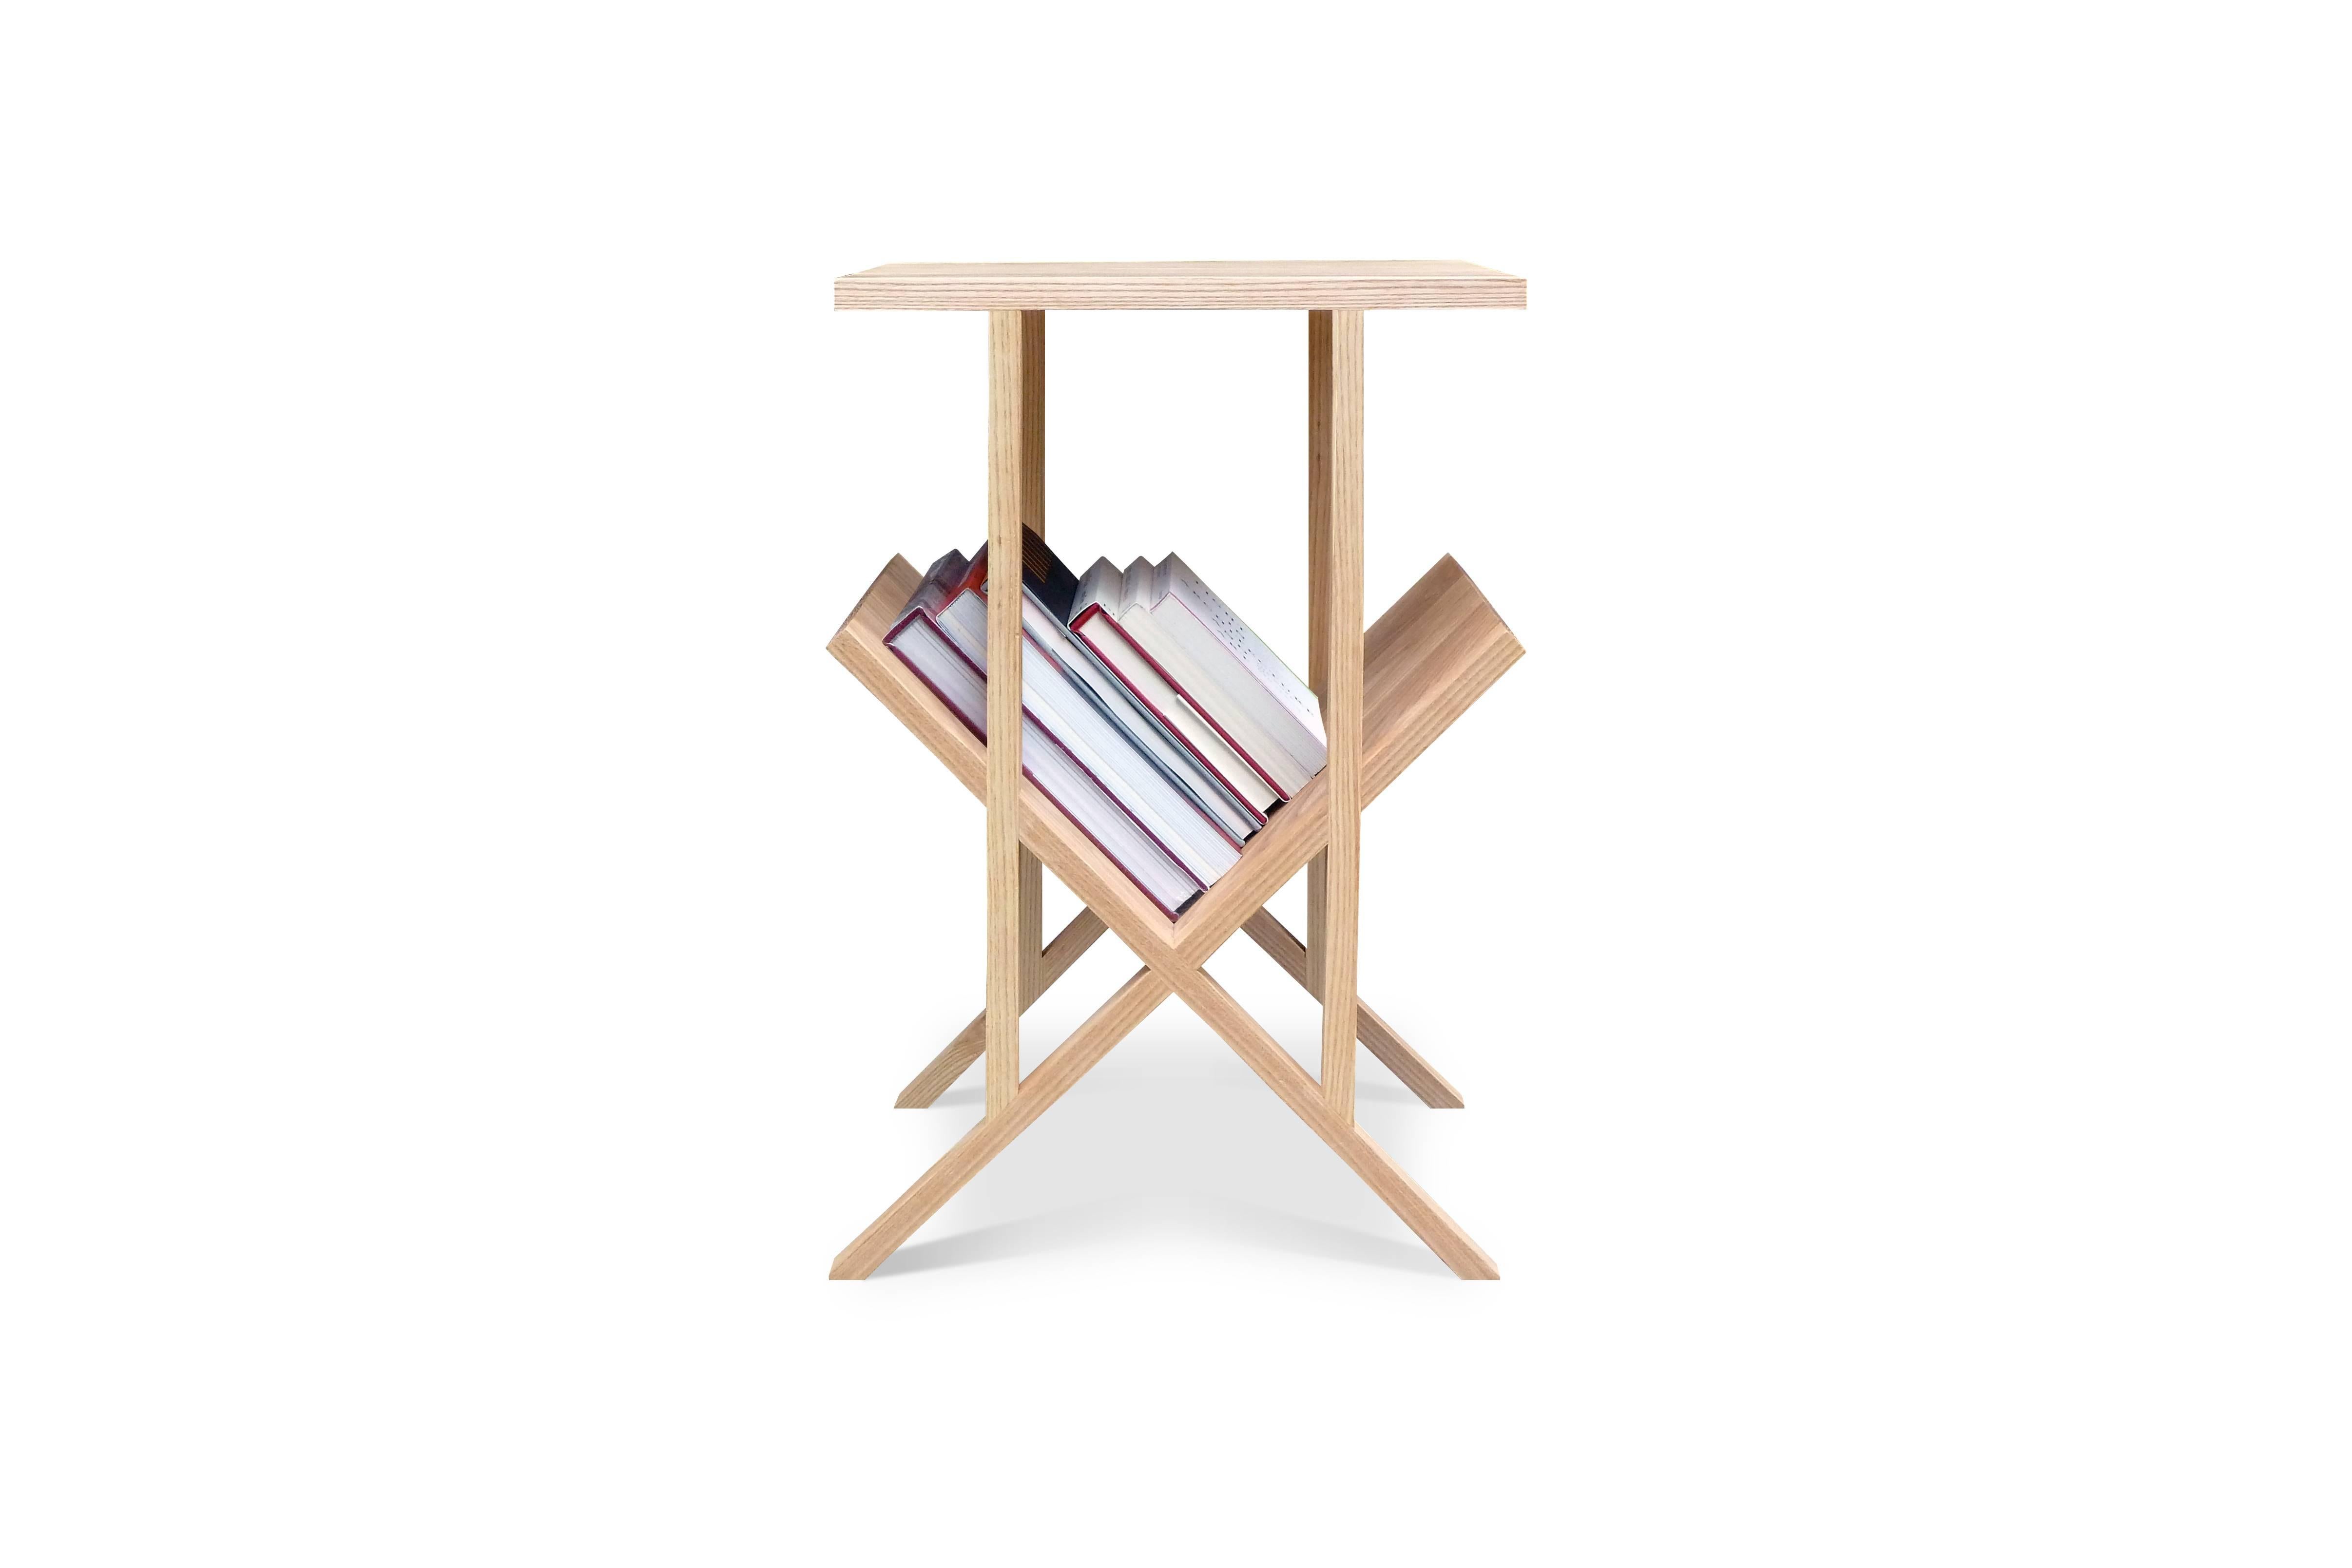 Named for the lap joints that make up its structure, the Lap Table is a versatile piece that can easily function as a side table, end table, nightstand, or entry table with a place for reading materials or mail. When viewed straight on, the form,